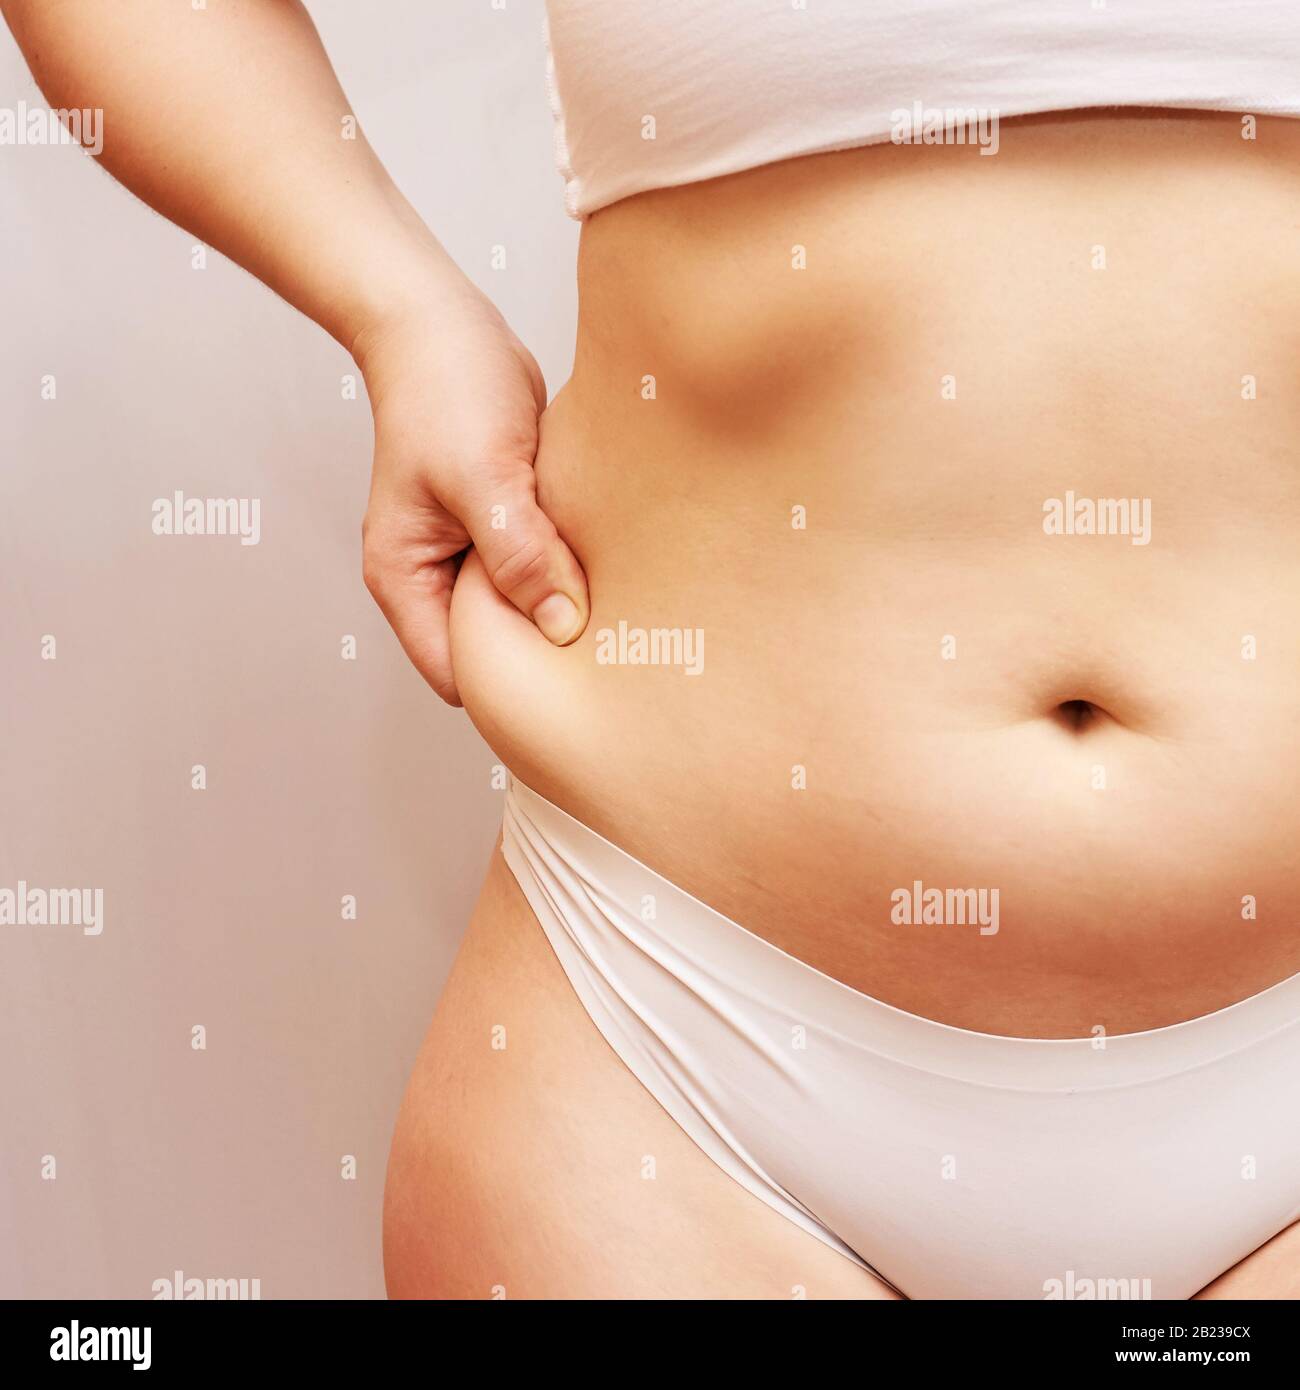 Fat unhealthy woman body. Pinch belly side. Measurement lady procedure. Medicine Stock Photo